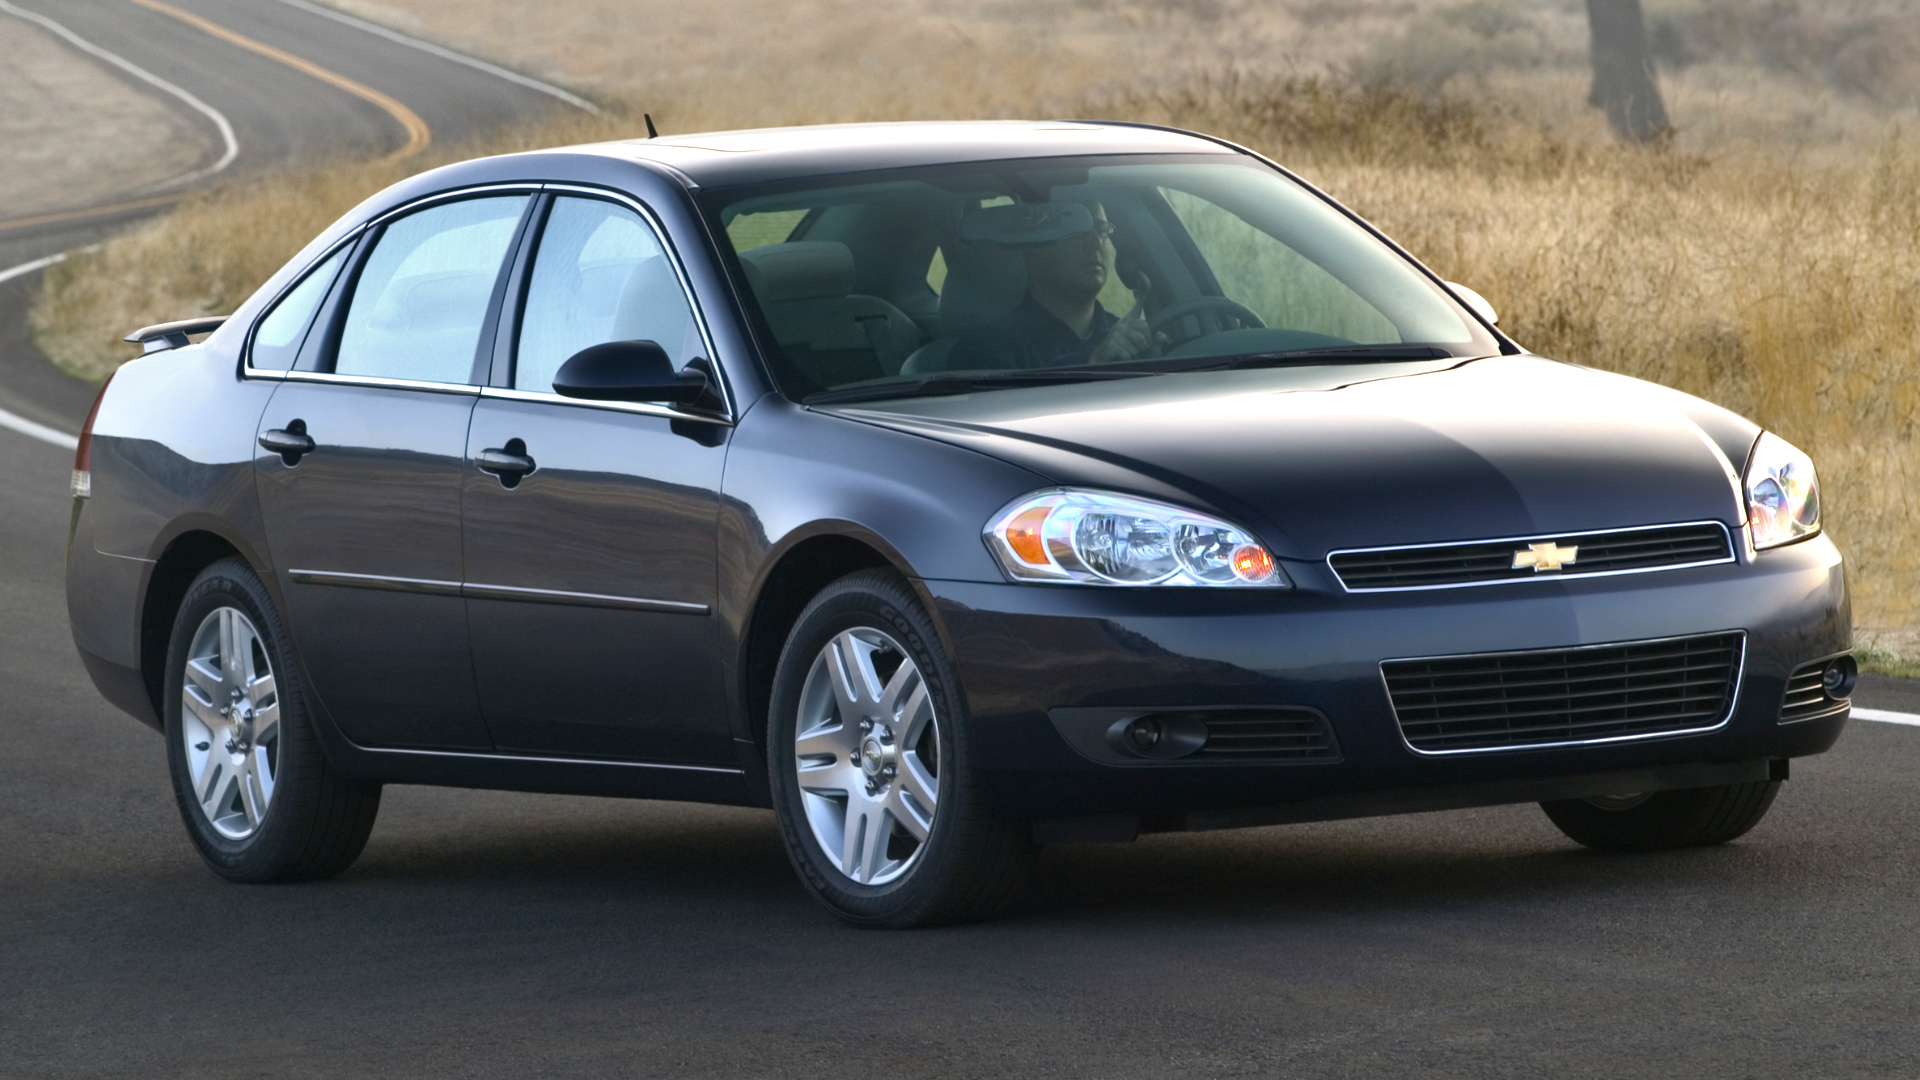 Buying a 10-Year-Old Chevy Impala Maximizes Your Miles per Dollar: Study